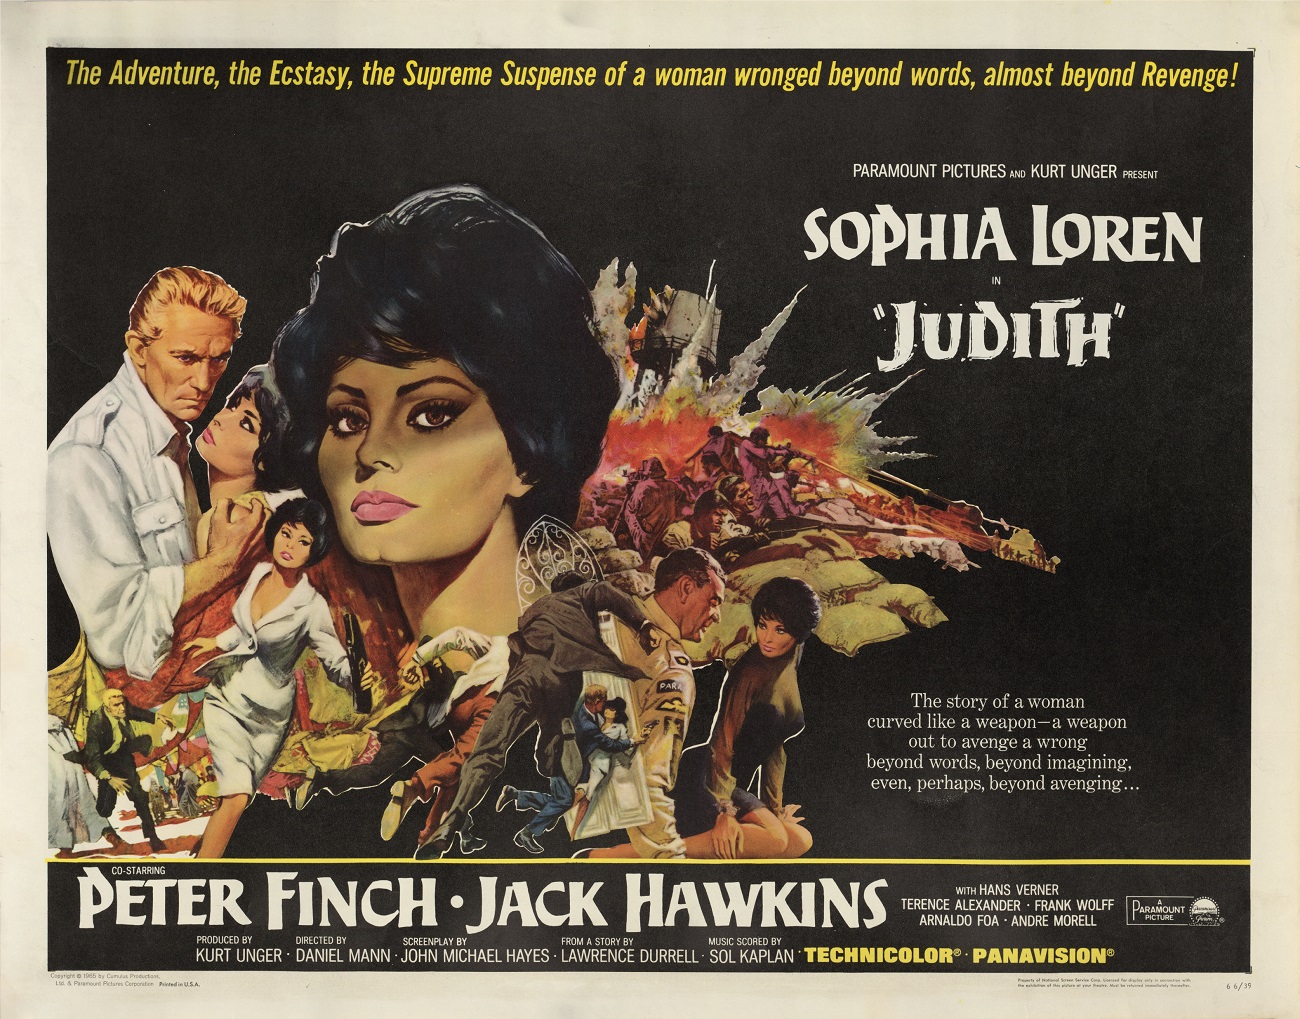 The original poster of the movie "Judith". Director: Daniel Mann, Producer: Kurt Unger/ USA 1966, courtesy of Daniel Unger (ANU - Museum of the Jewish People collection)